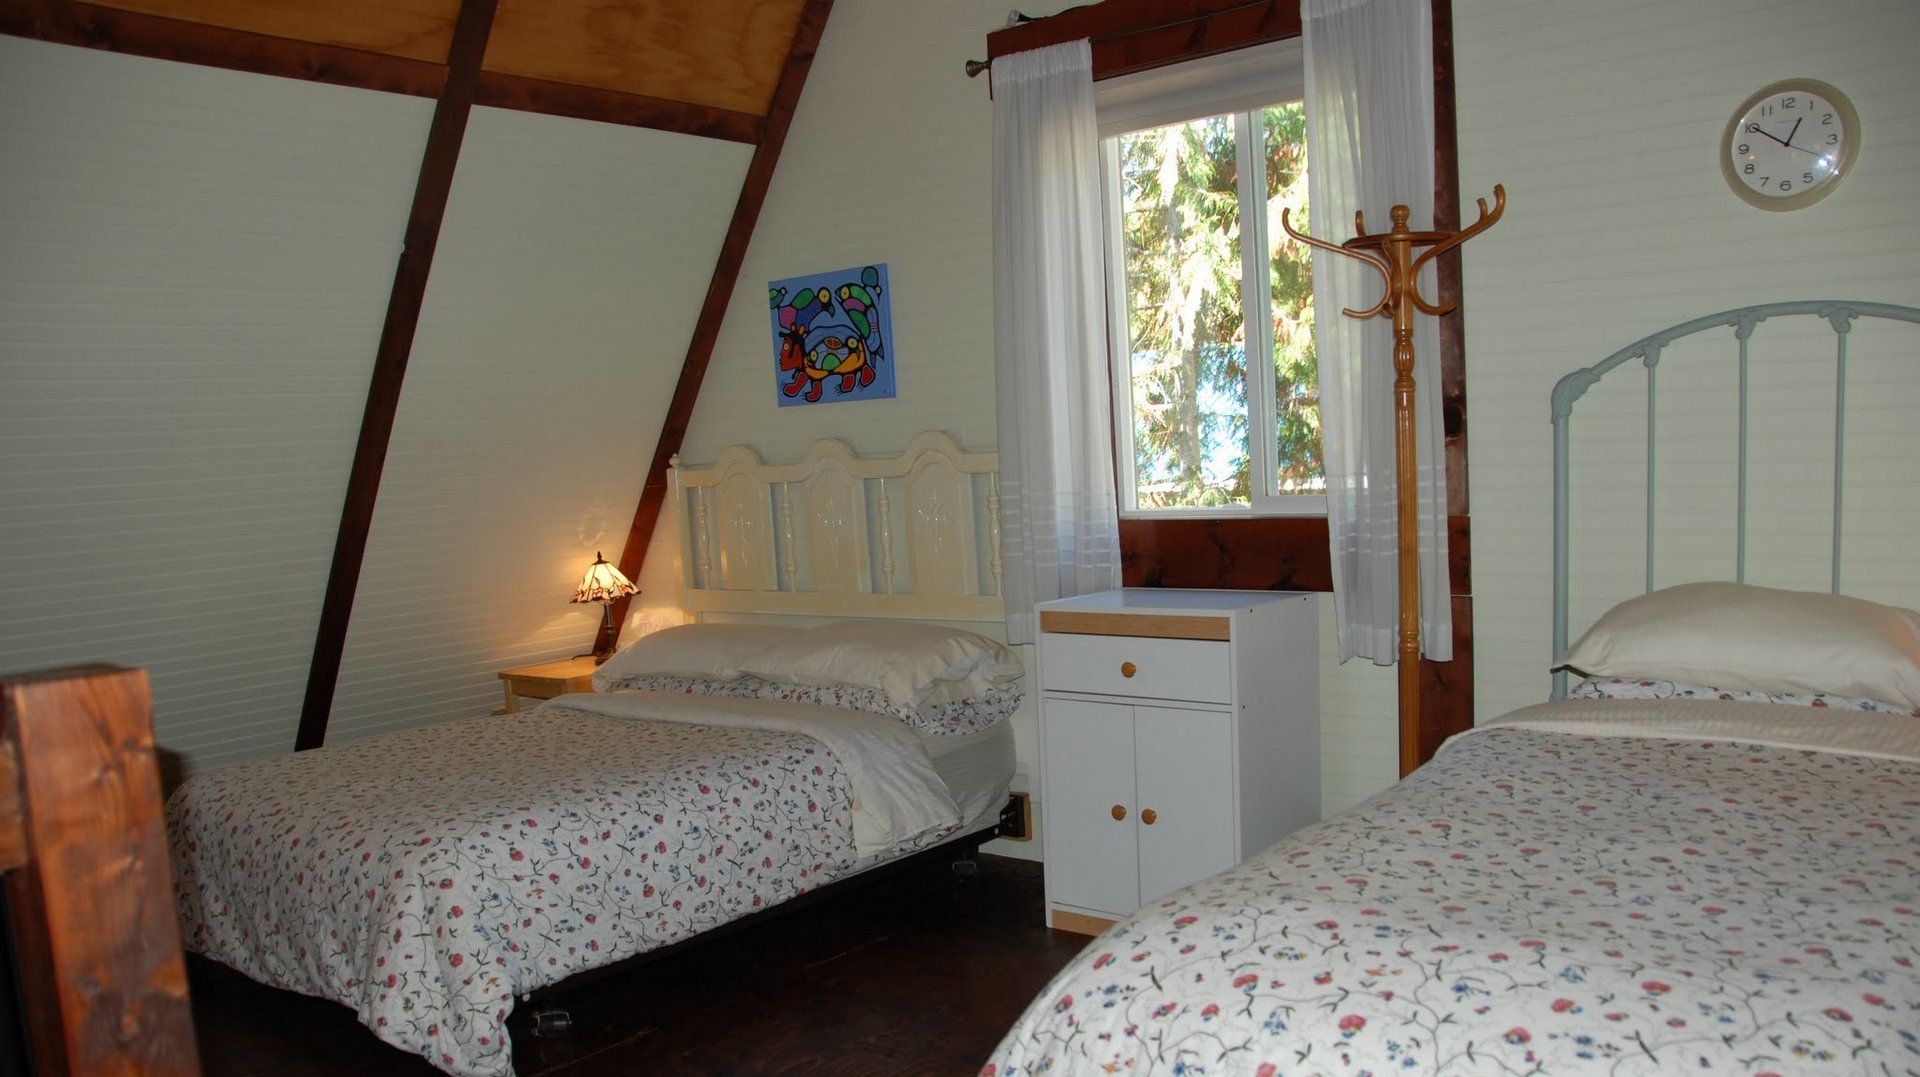 Double and single bed in Monashee Cabin loft.